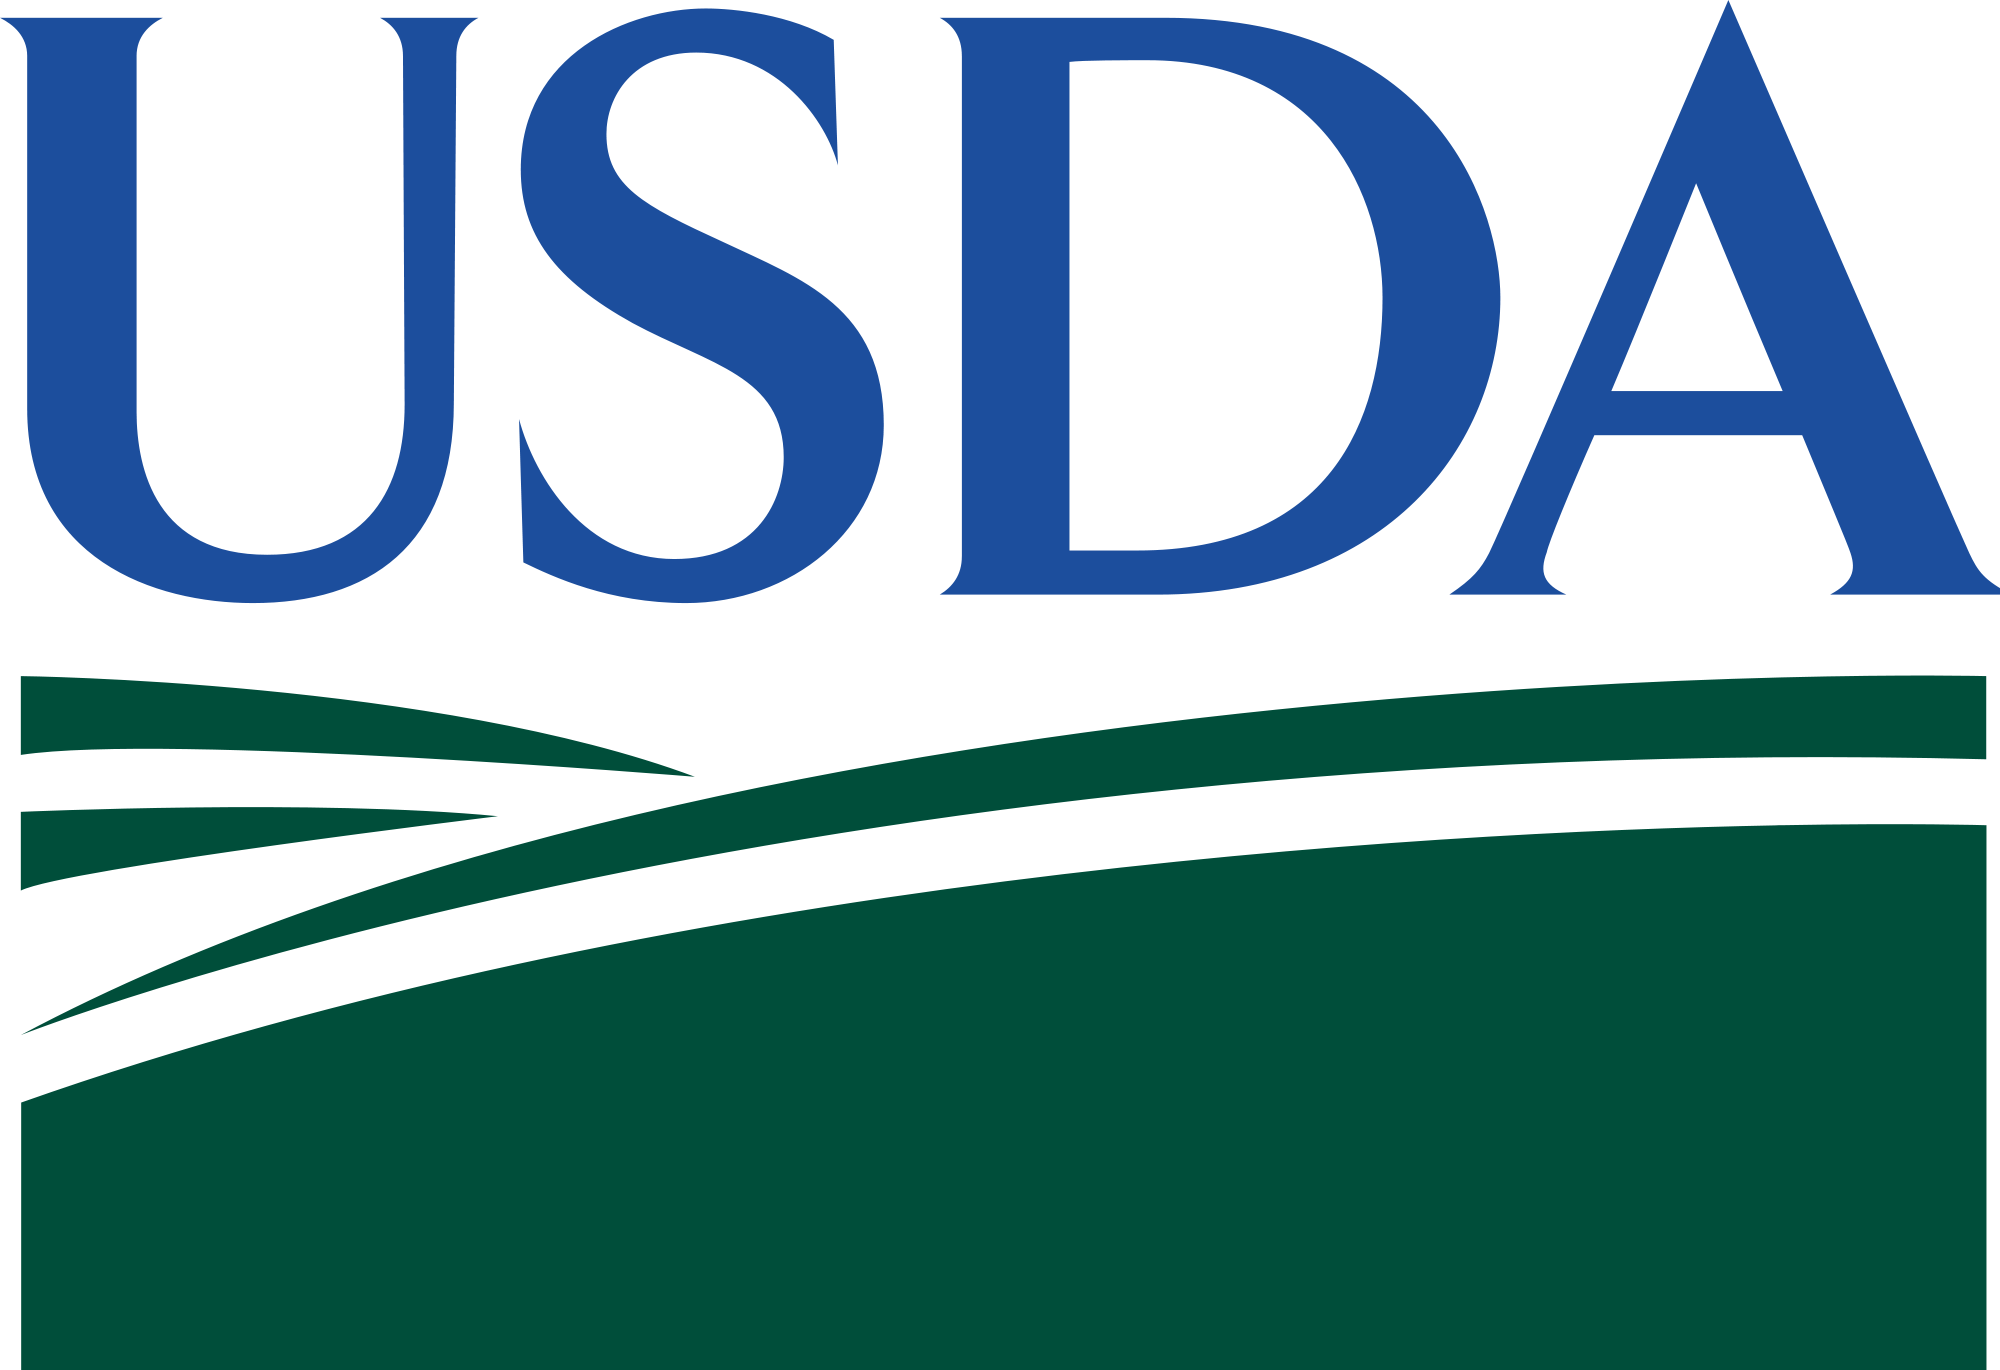 Talent in Agriculture for Climate Change and Food Security Adaptation (TACFSA) USDA Program